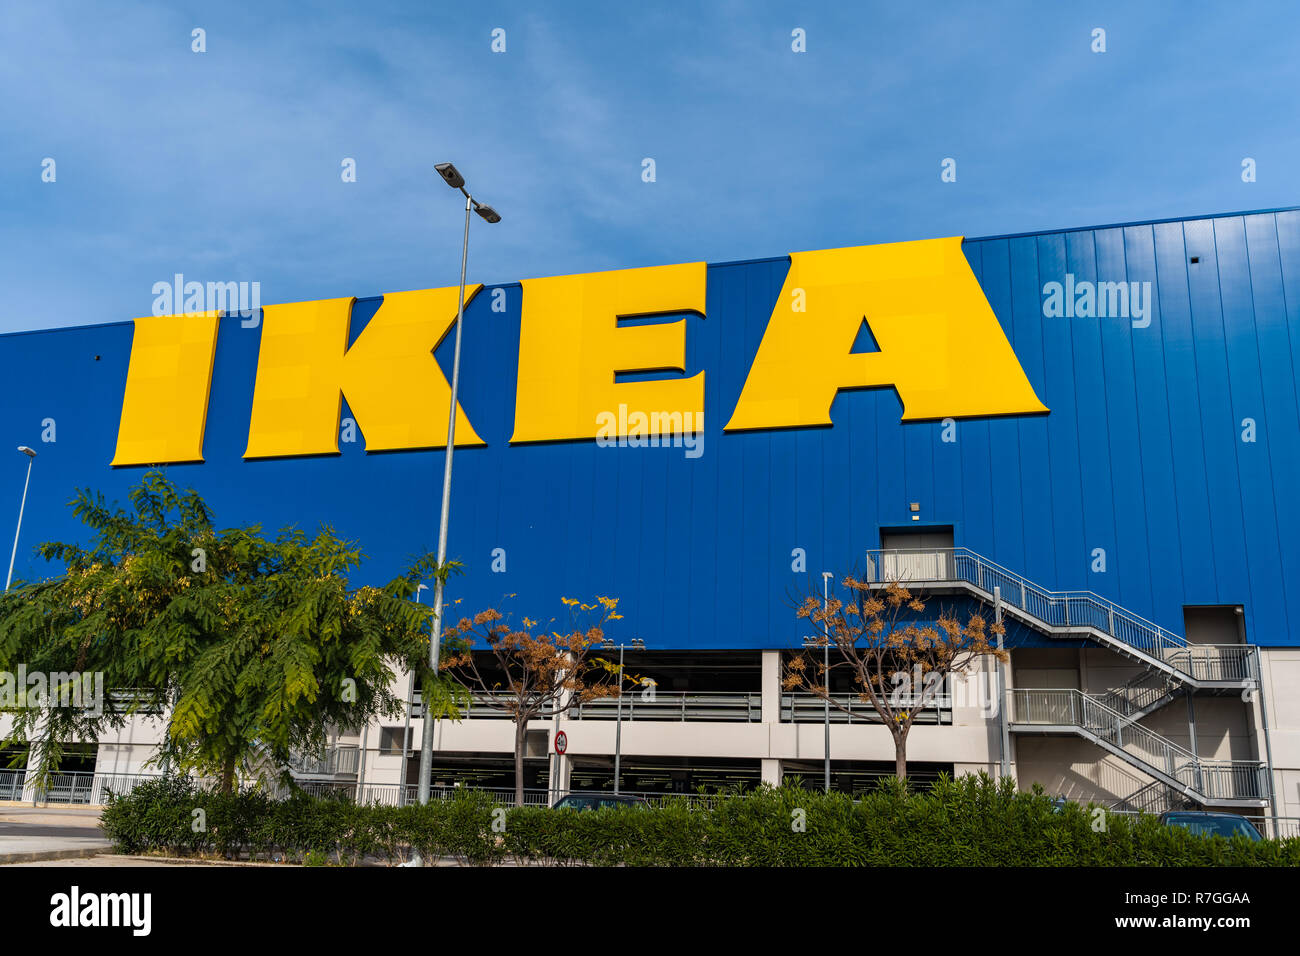 Valencia,Spain - December 09, 2018: Ikea store lot in Alfafar, Valencia. Huge  yellow Ikea word on blue background. Blue skyes on the top. Exterior vi Stock Photo